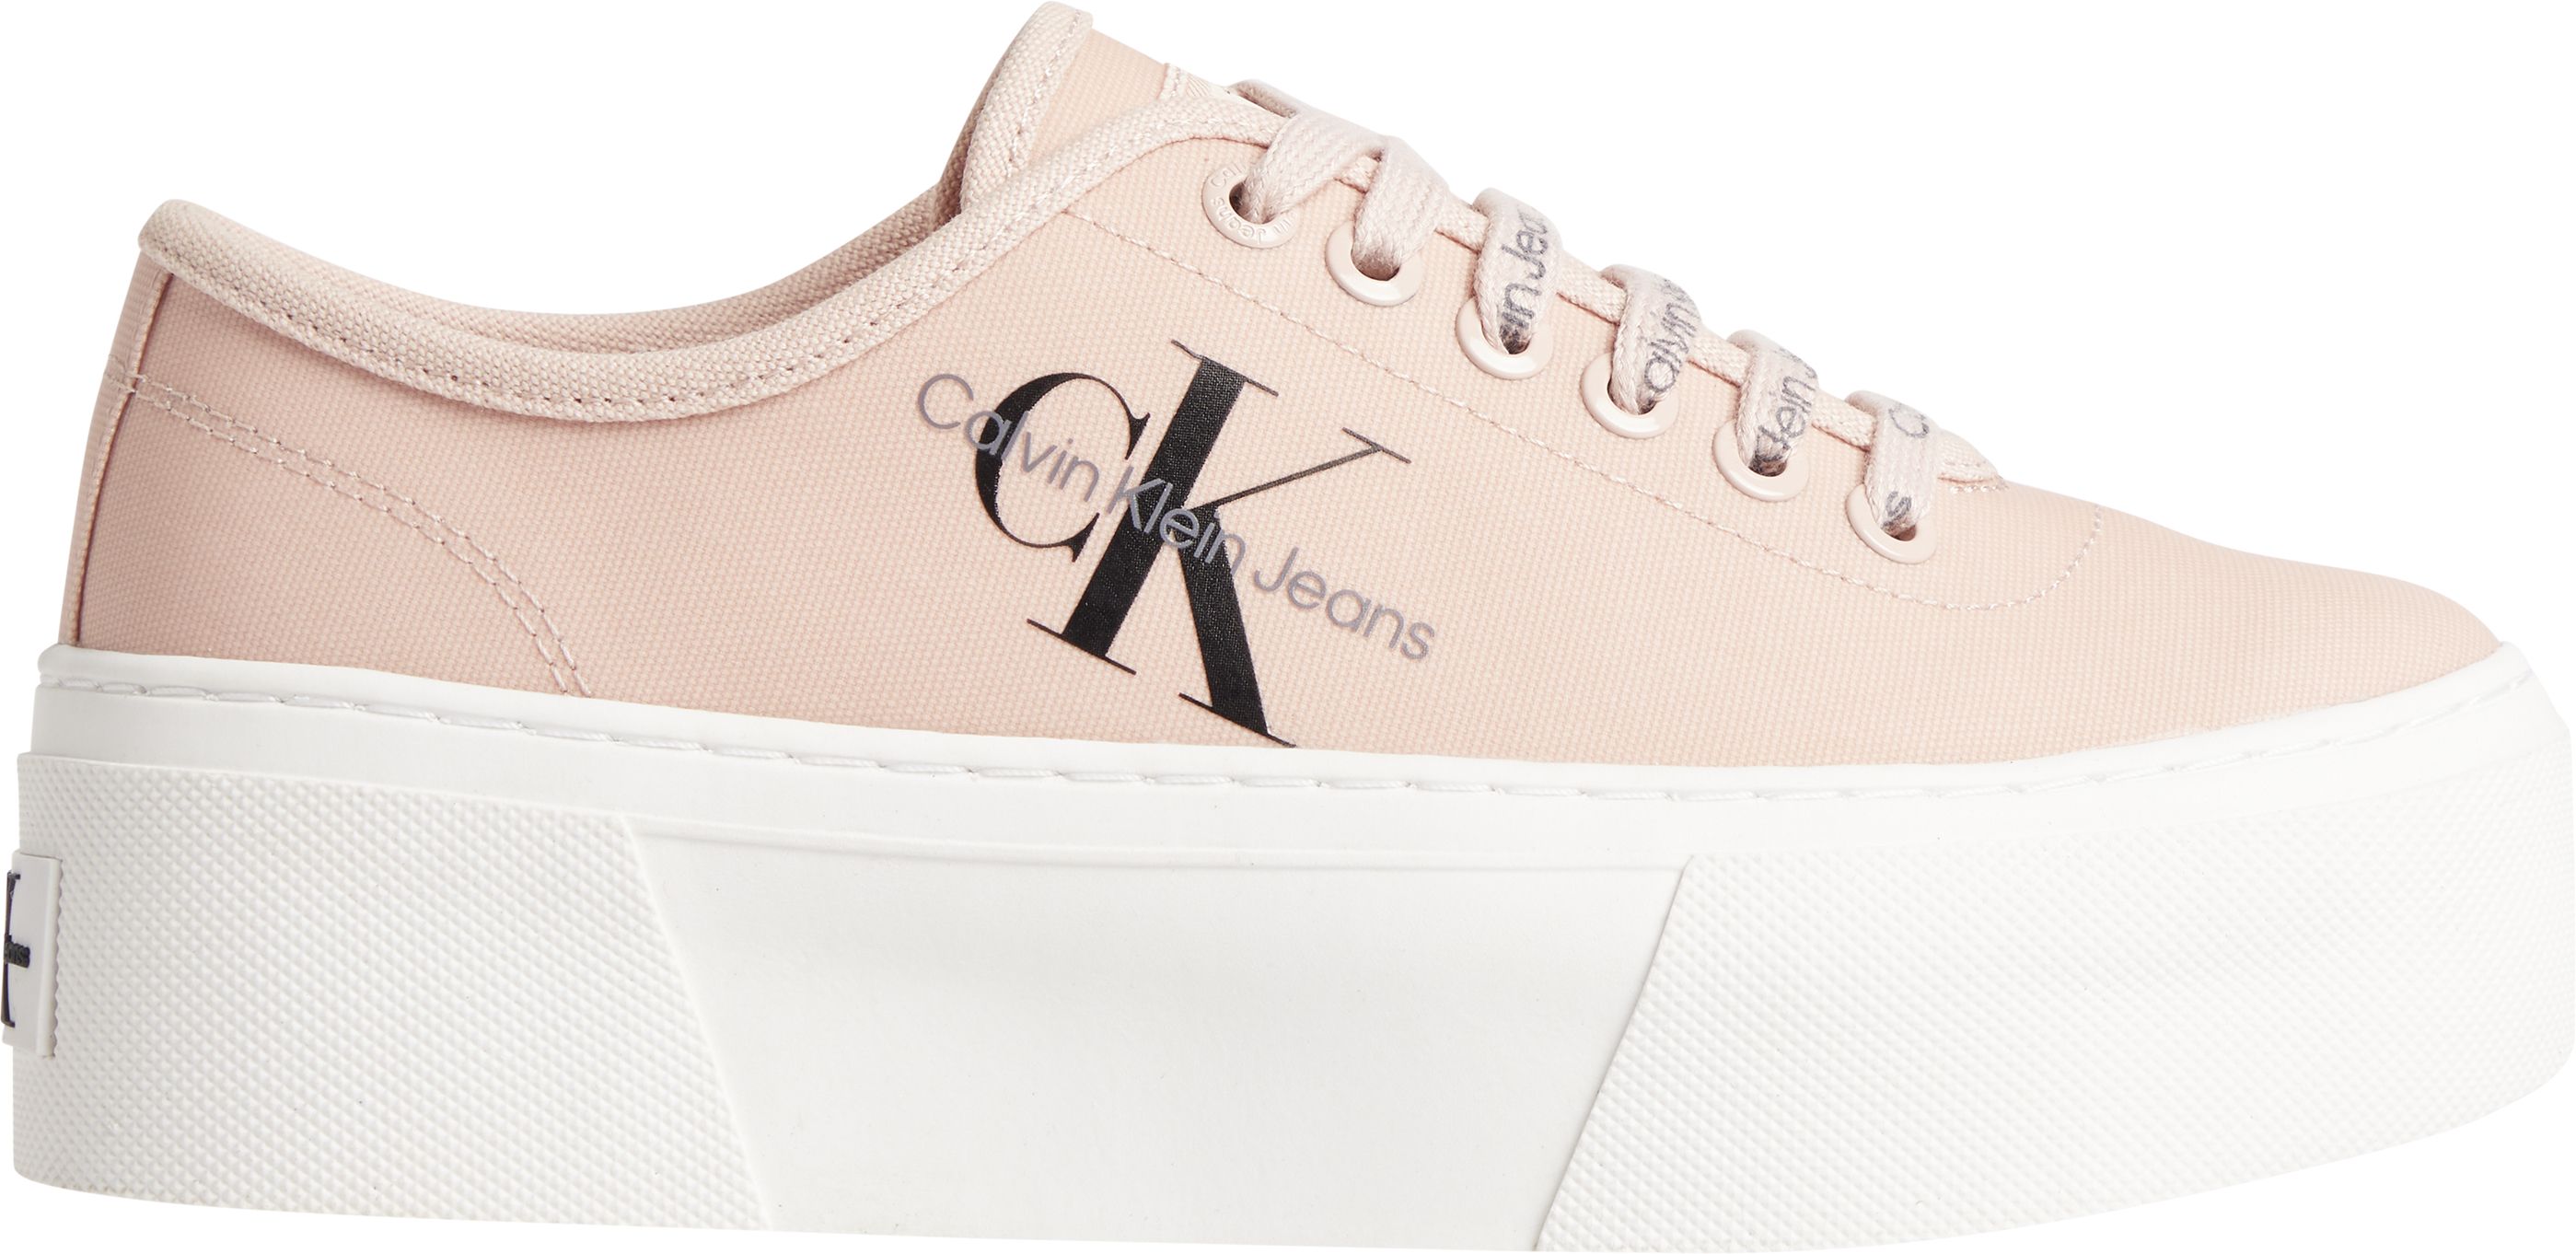 Calvin Klein Jeans Canvas Sneakers With Platform